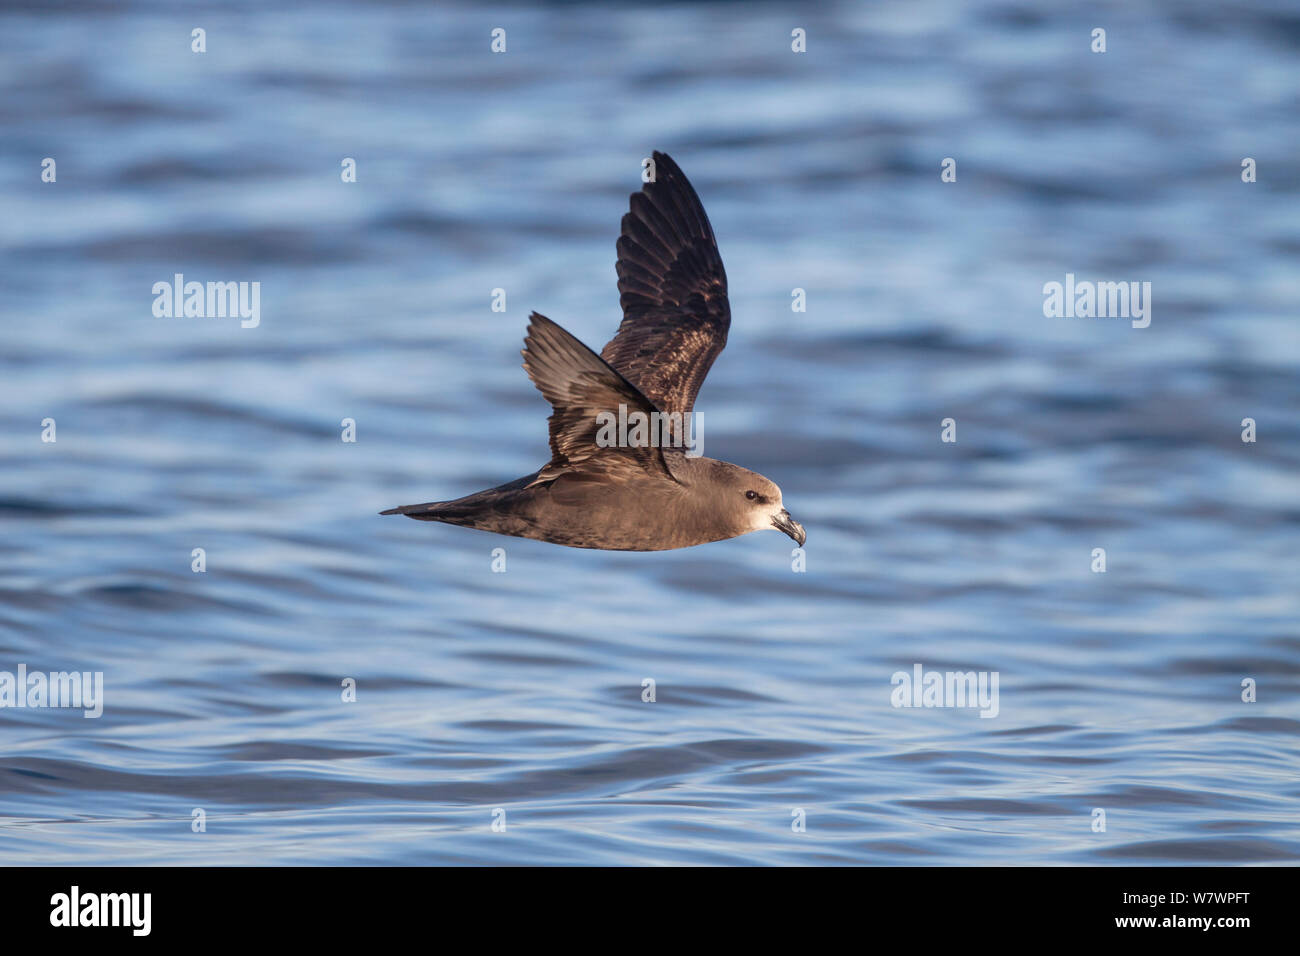 Adult Grey-faced petrel (Pterodroma gouldi) flying at sea, showing the pale face and underwing pattern. Hauraki Gulf, Auckland, New Zealand, October. Stock Photo